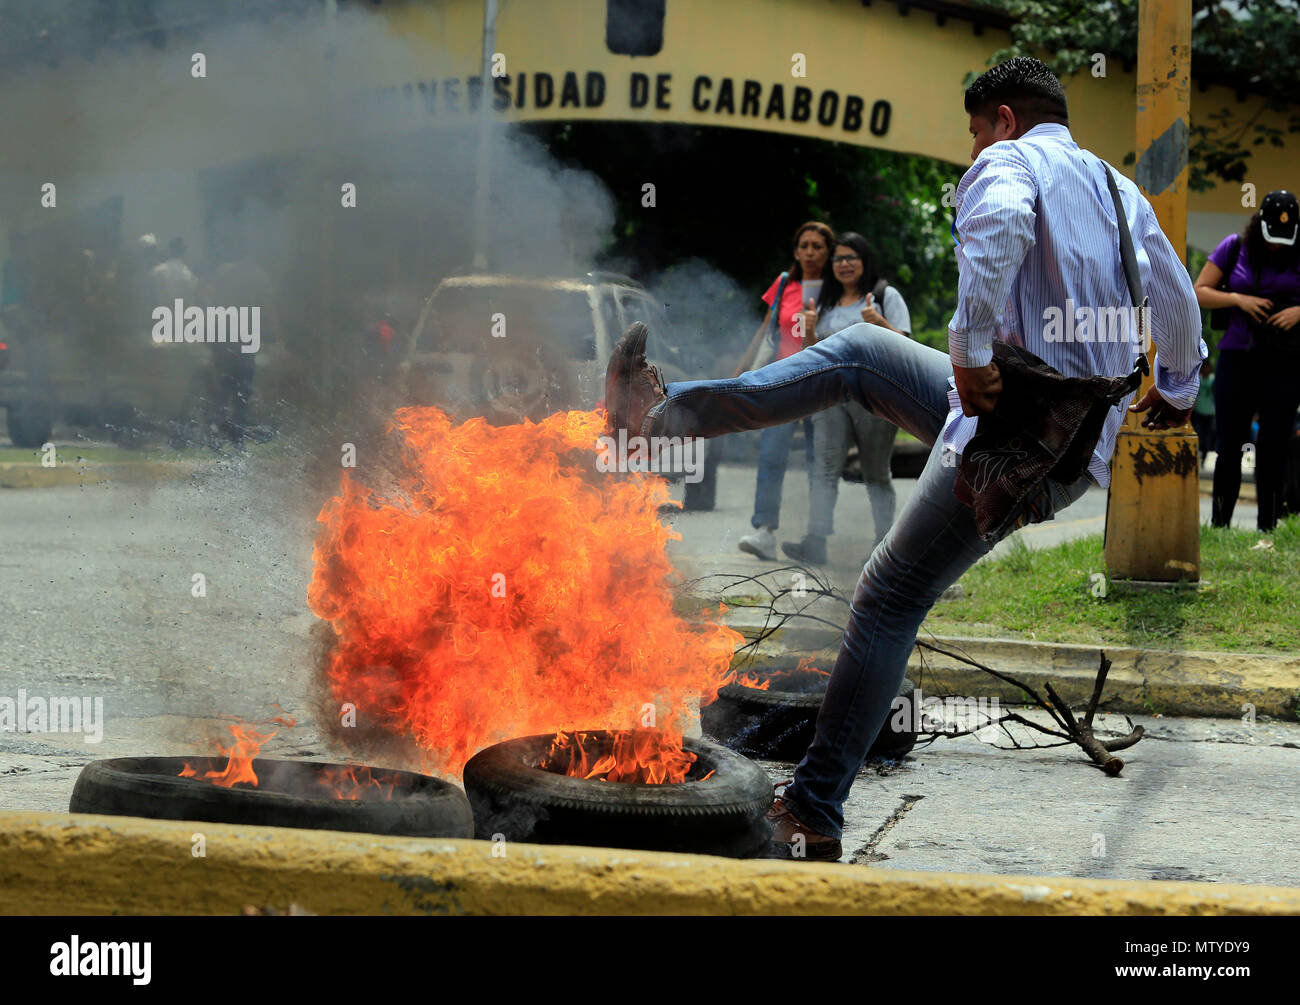 Valencia, Carabobo, Venezuela. 30th May, 2018. May 30, 2018. Students from the University of Carabobo protested the lack of food variety in the university cafeteria, the menu was minimized to pork with salt or just soup. The protest was held in the arc of Barbula, the main entrance of the house of studies, where there were barricades and burning of rubbers, in Valencia, Carabobo state. Photo: Juan Carlos Hernandez Credit: Juan Carlos Hernandez/ZUMA Wire/Alamy Live News Stock Photo